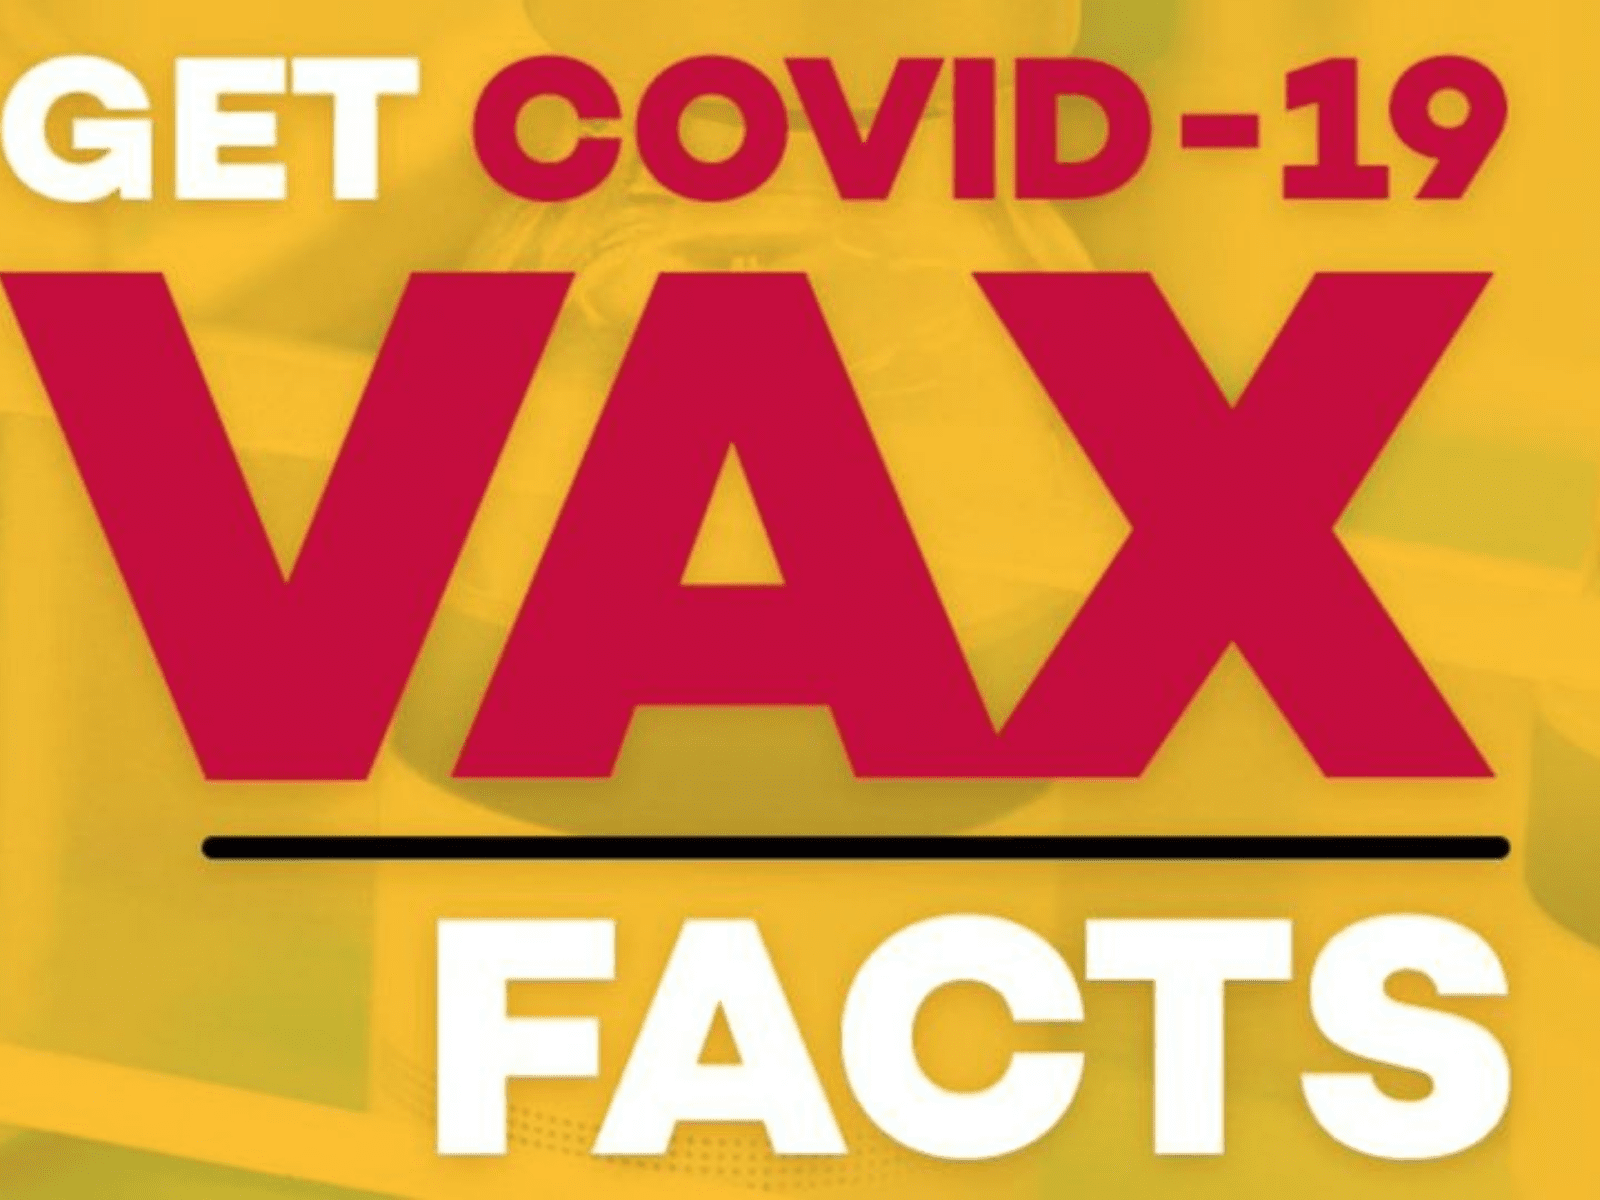 A poster about COVID-19 vaccine facts